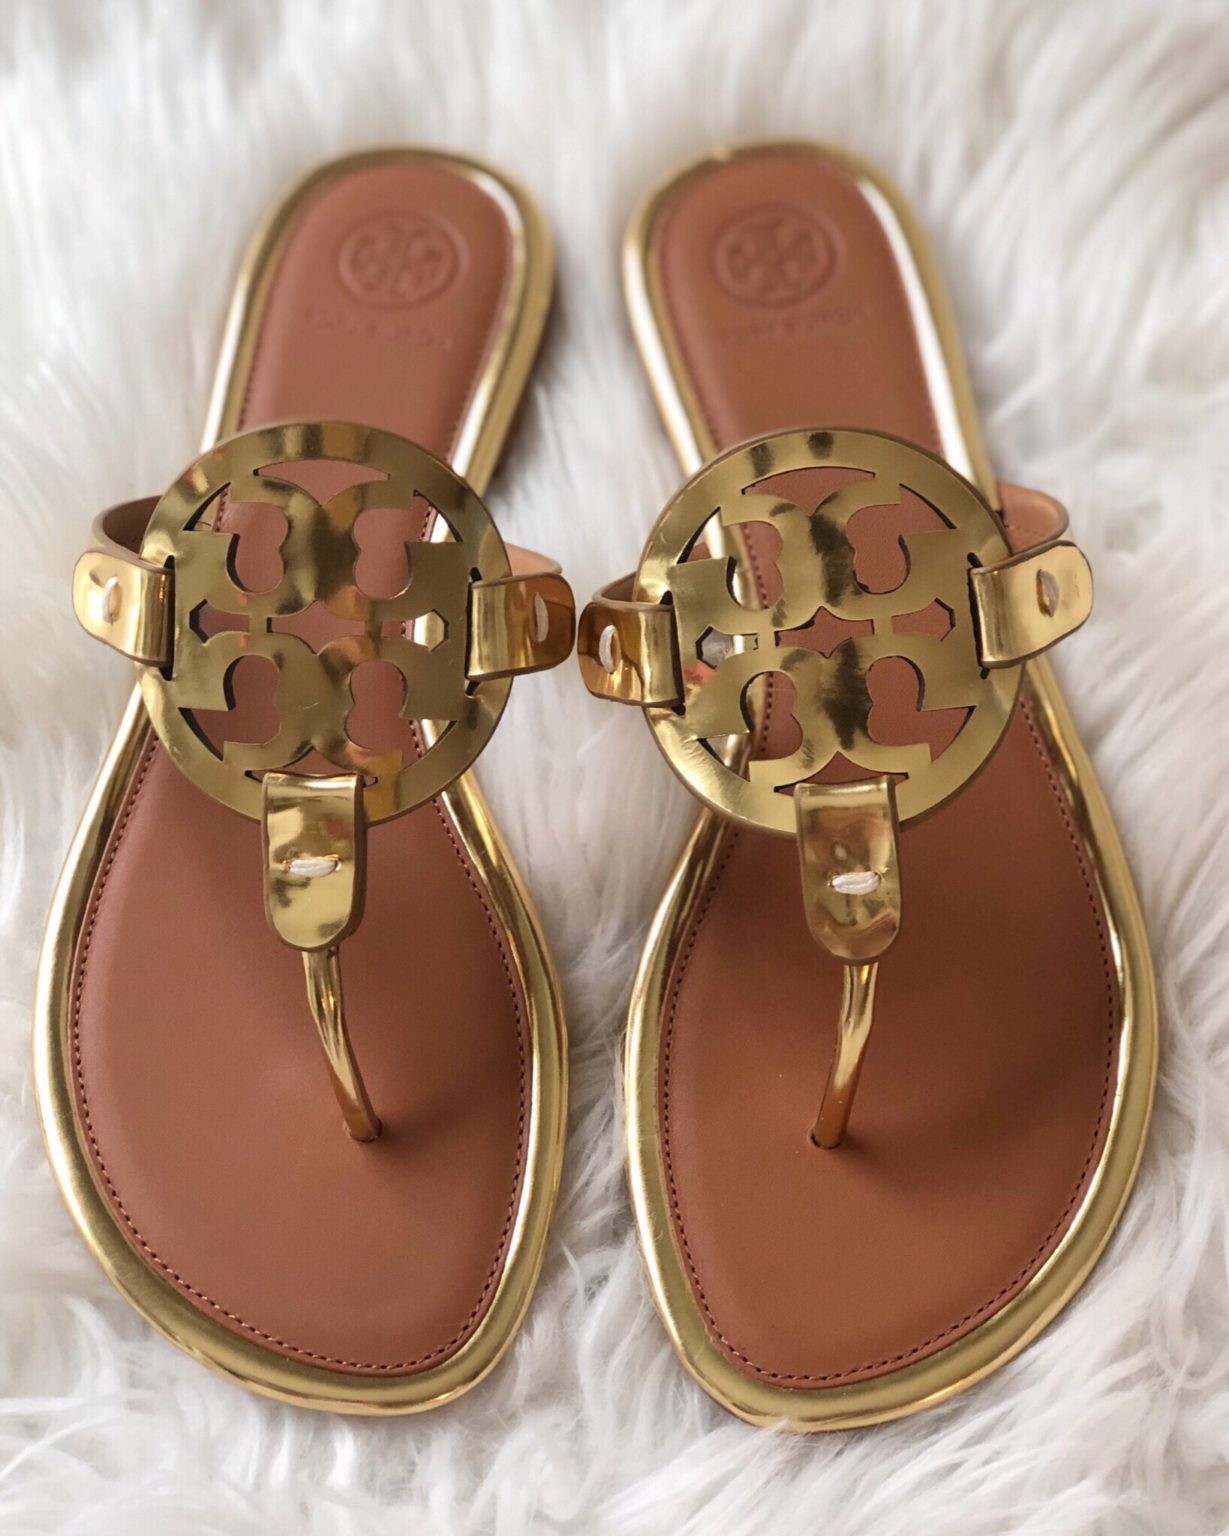 Tory Burch $50 Off Miller Sandal Promo!! - The Double Take Girls